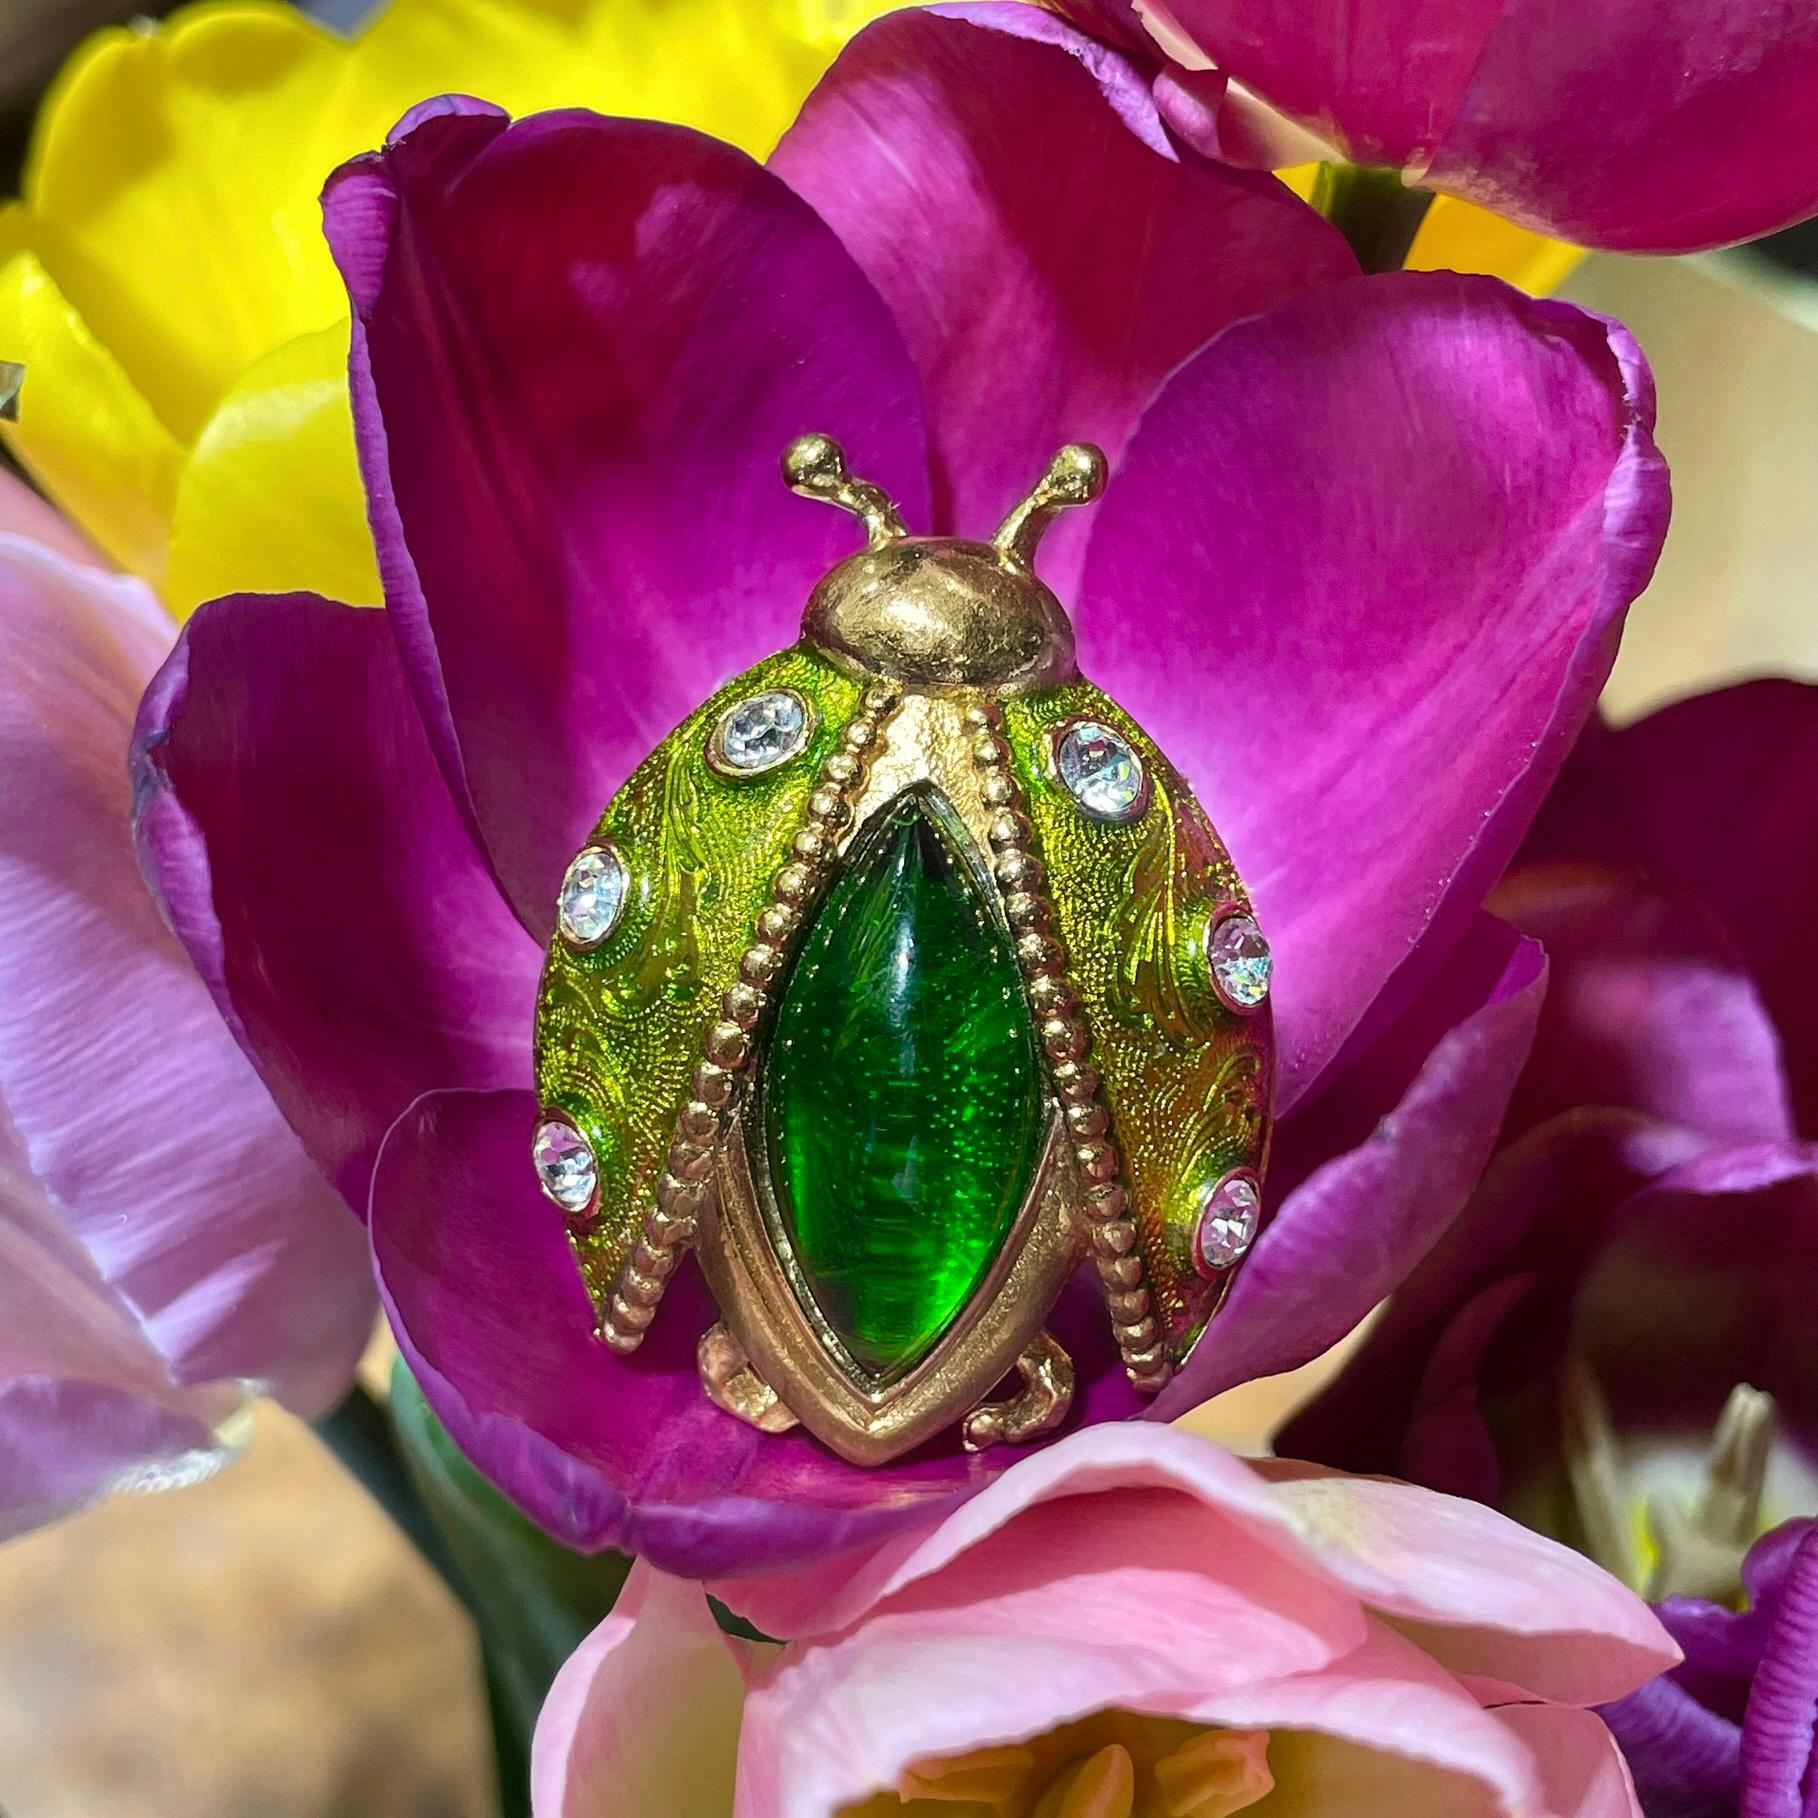 This is a lovely jewelled ladybug pin brooch designed by Christian Dior in 1990’s. The piece is gold plated. It is adorned with green enamel, clear rhinestones and almond cabochon green resin.

Signed: “Christian Dior. Parfums” (shown in